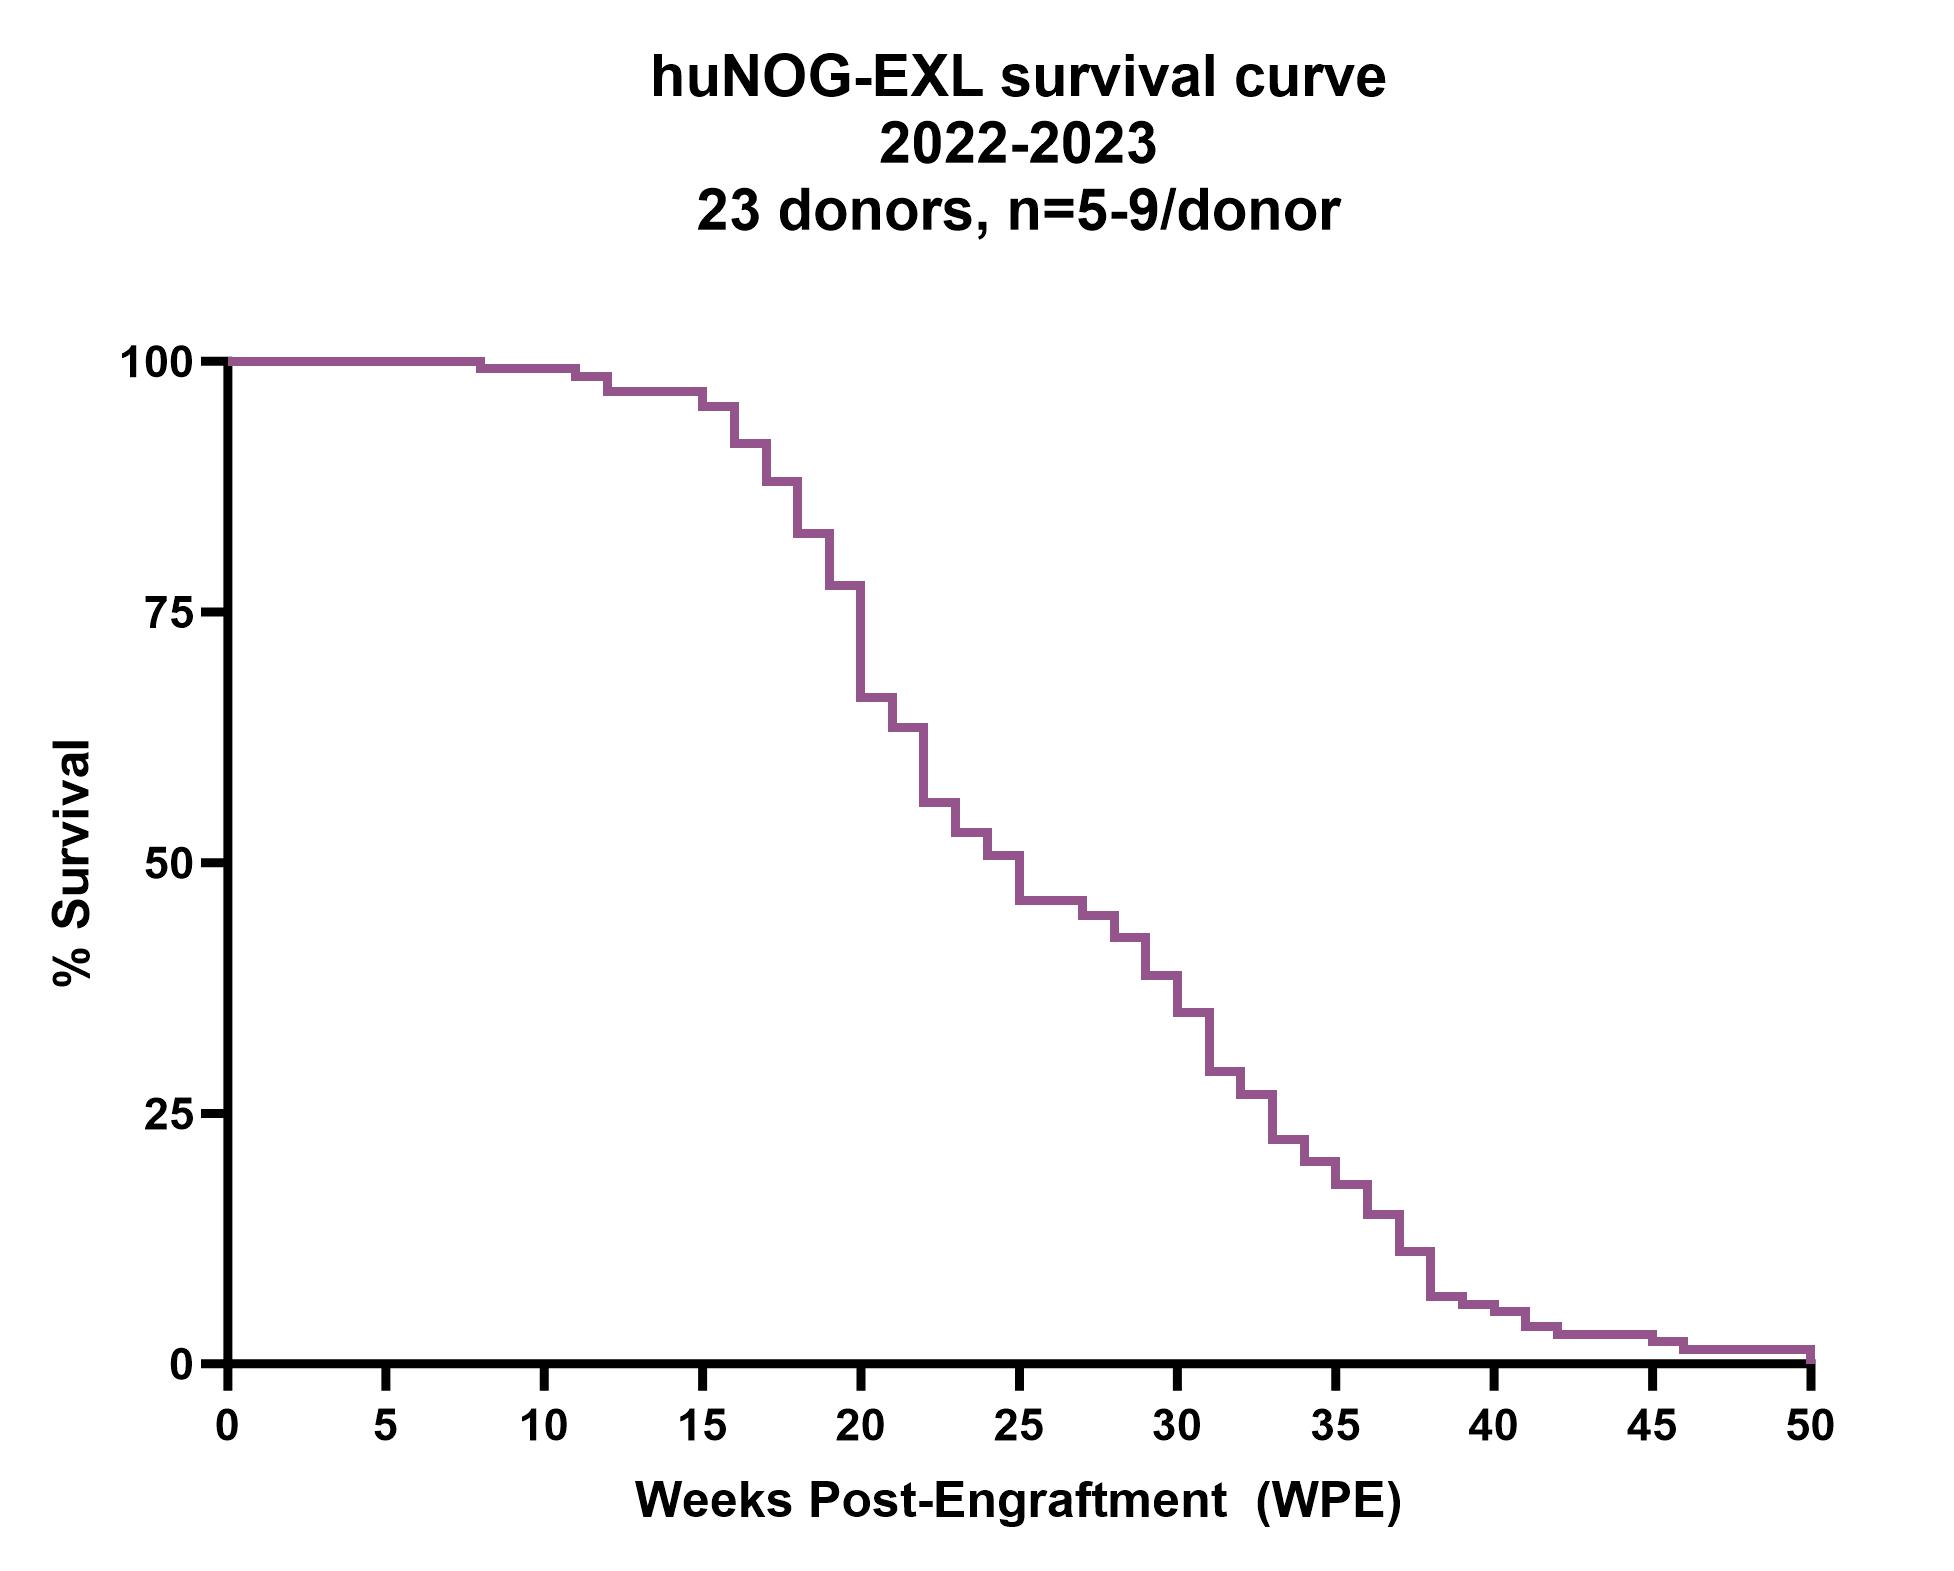 huNOG-EXL mice have extended lifespan compared to competing models